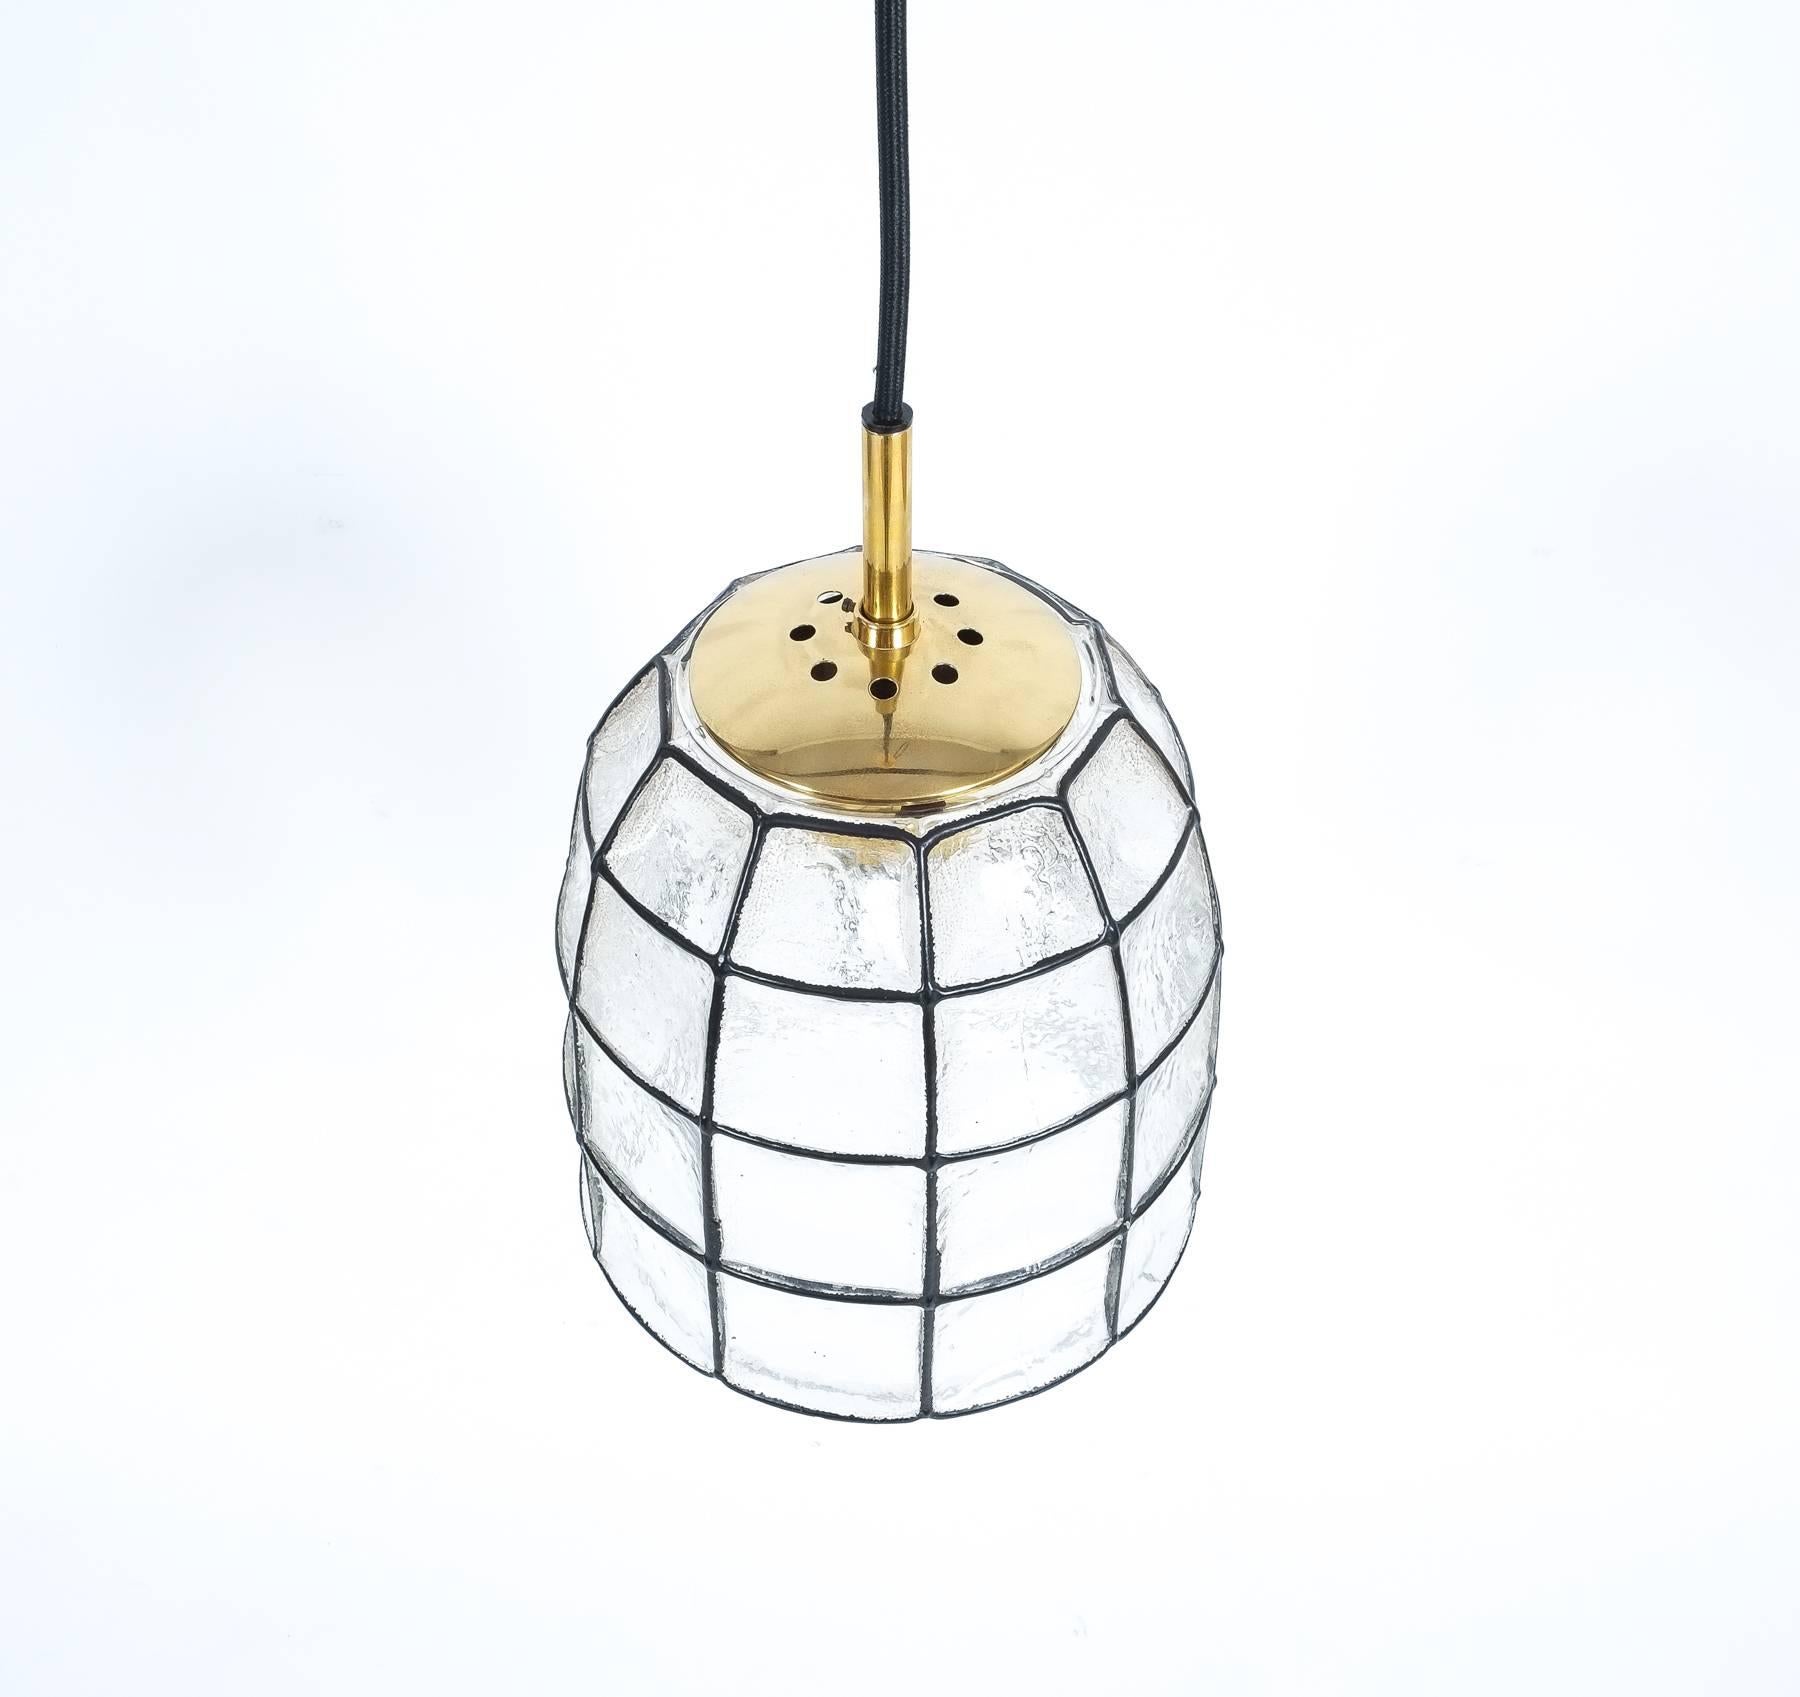 Pair 'iron' and glass bell-shaped pendant light by Limburg, Germany. Priced per piece. The fixtures feature a concaved thick clear glass shade with rectangular black accent 'iron' elements. The hardware is made from polished brass. It holds a single